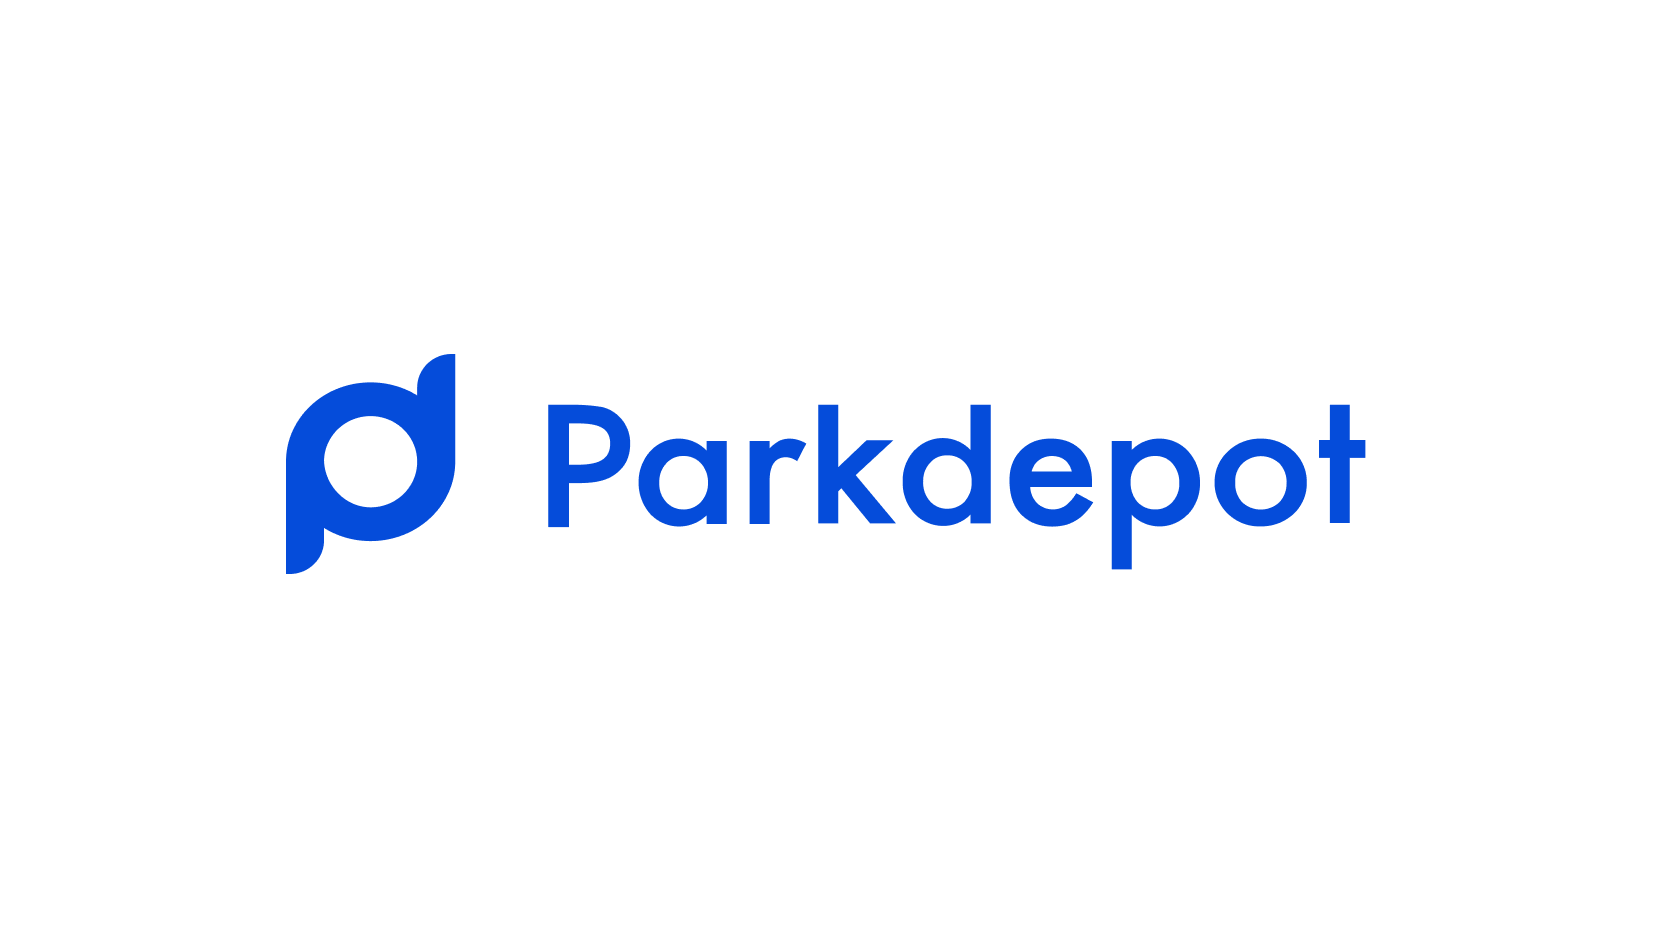 Tech & Product DD | Growth | Code & Co. advises Armira on Parkdepot